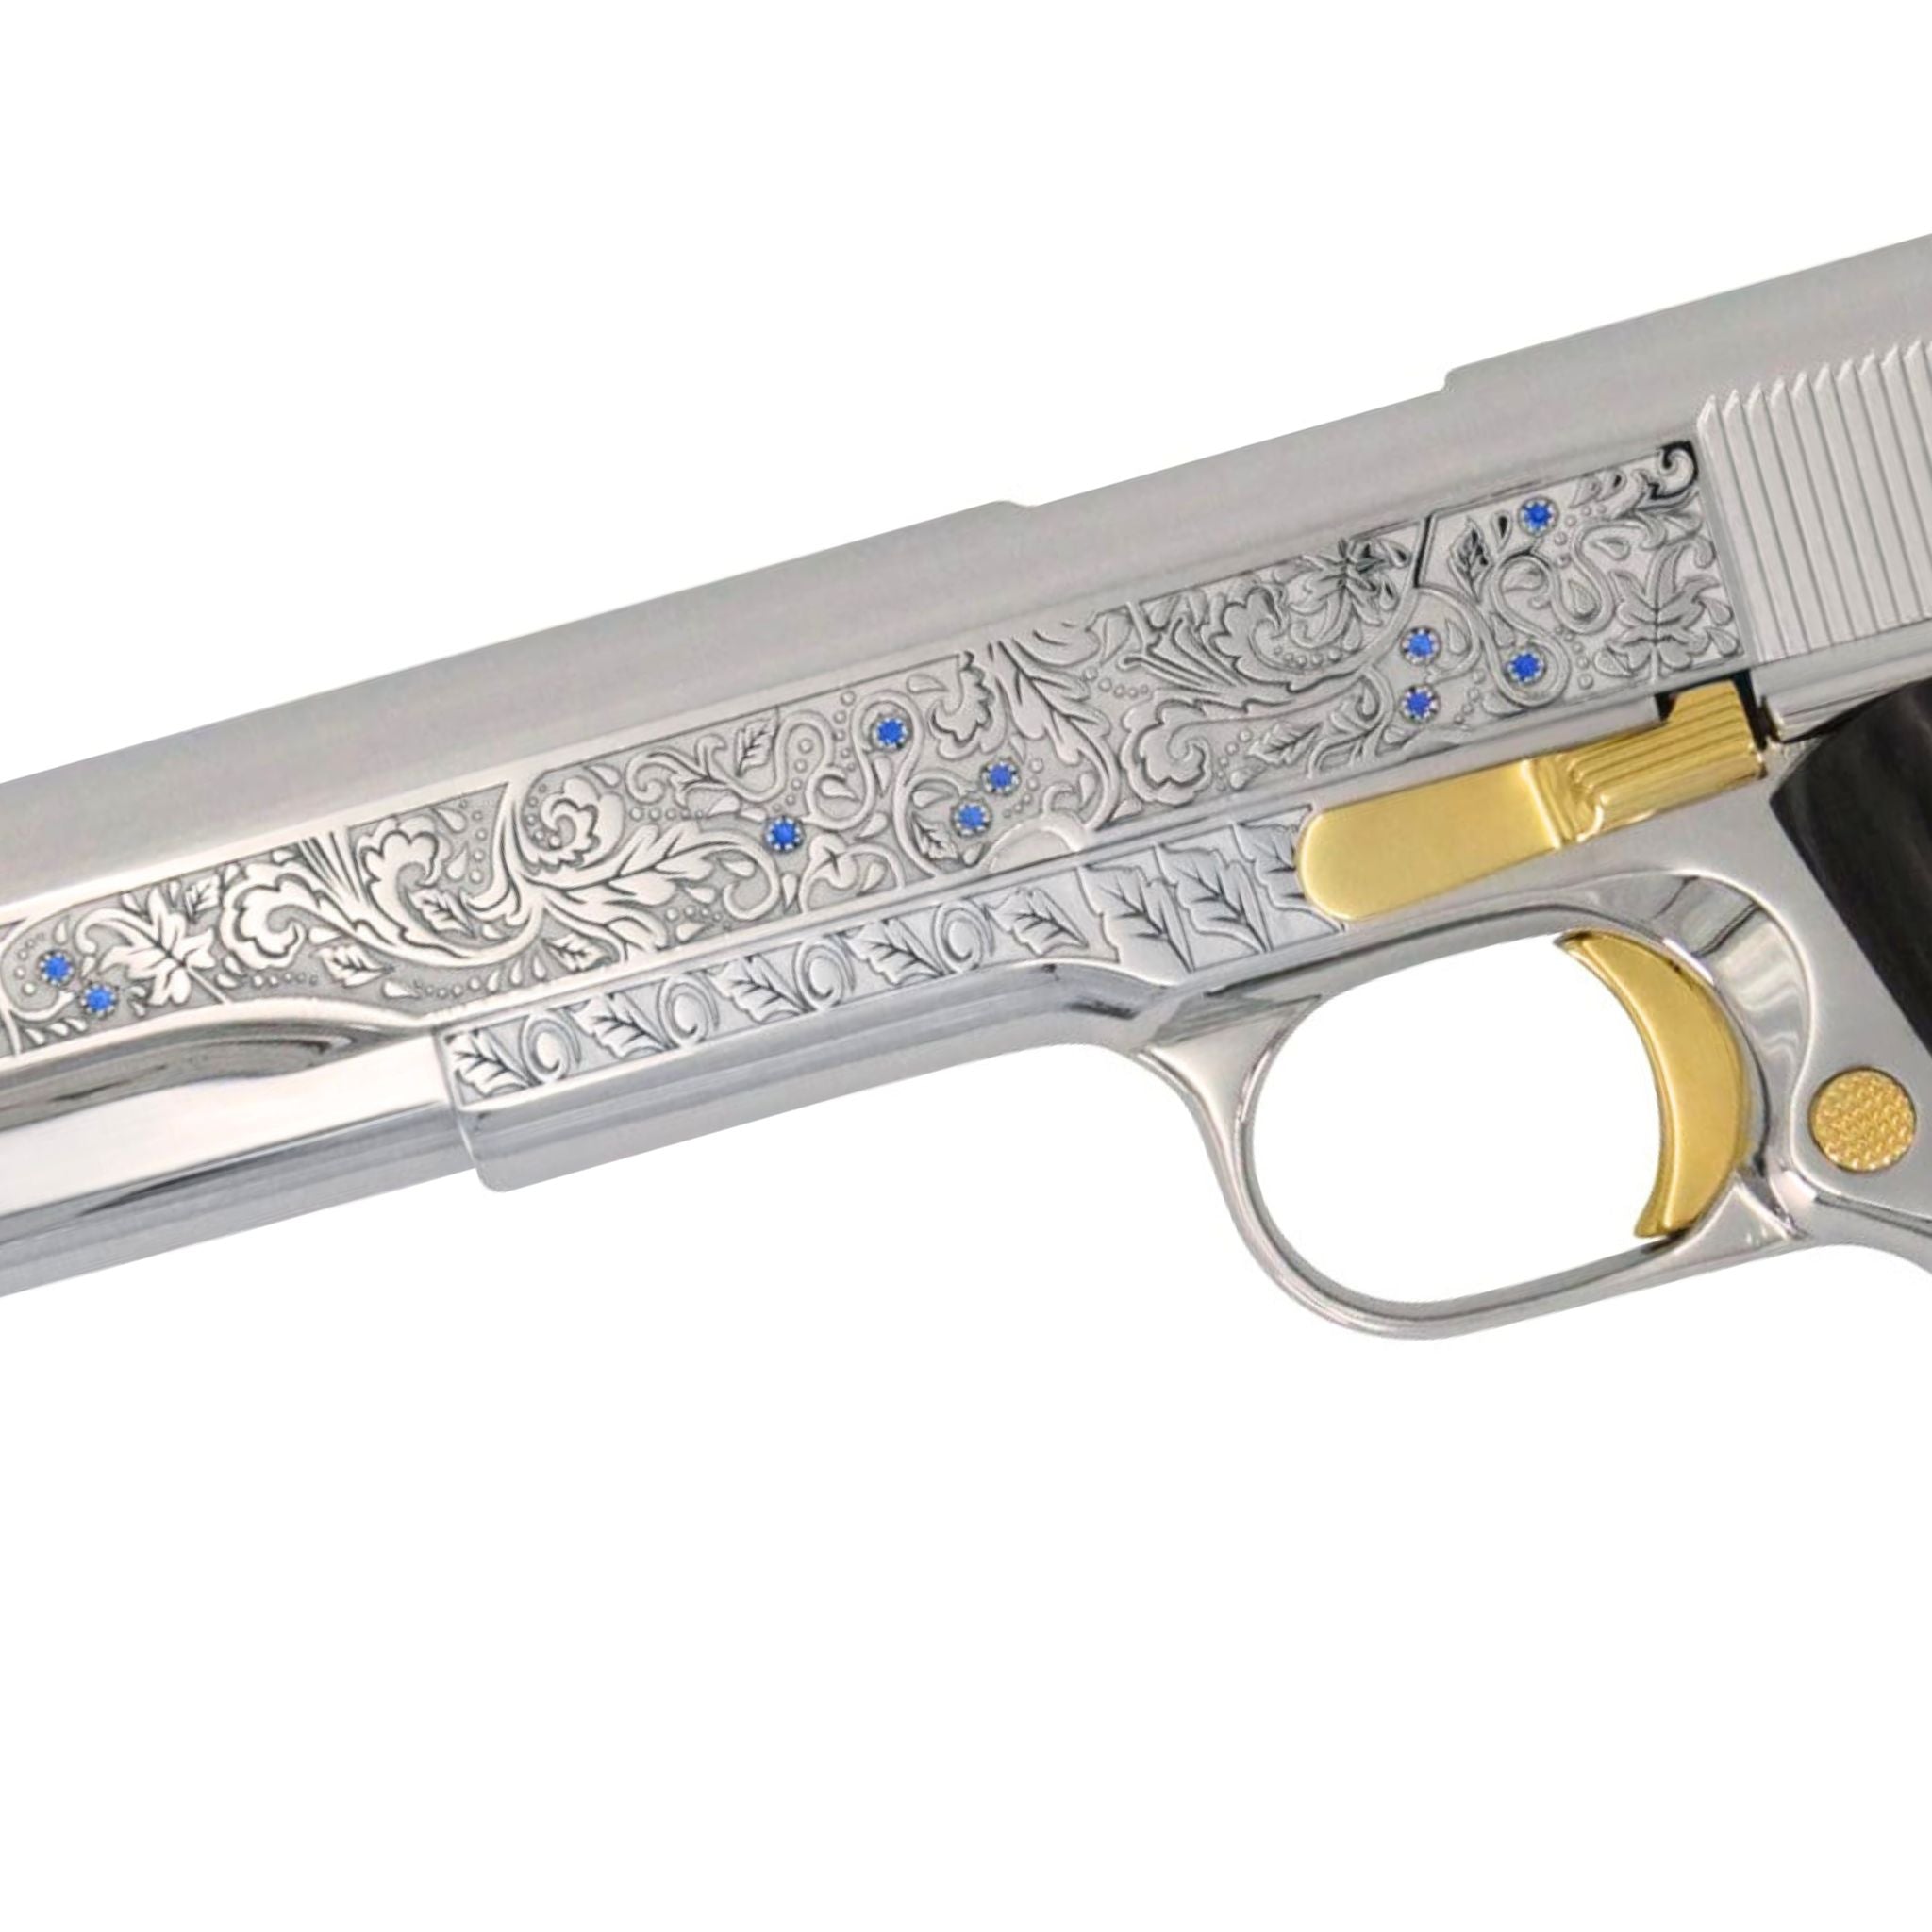 Colt 1911 Government, 38 Super, Scroll Design With Diamonds, High Polish Stainless Steel  With 24 karat Gold Accents, 4976533012582,  24K Gold Firearms, 24 karat gold guns